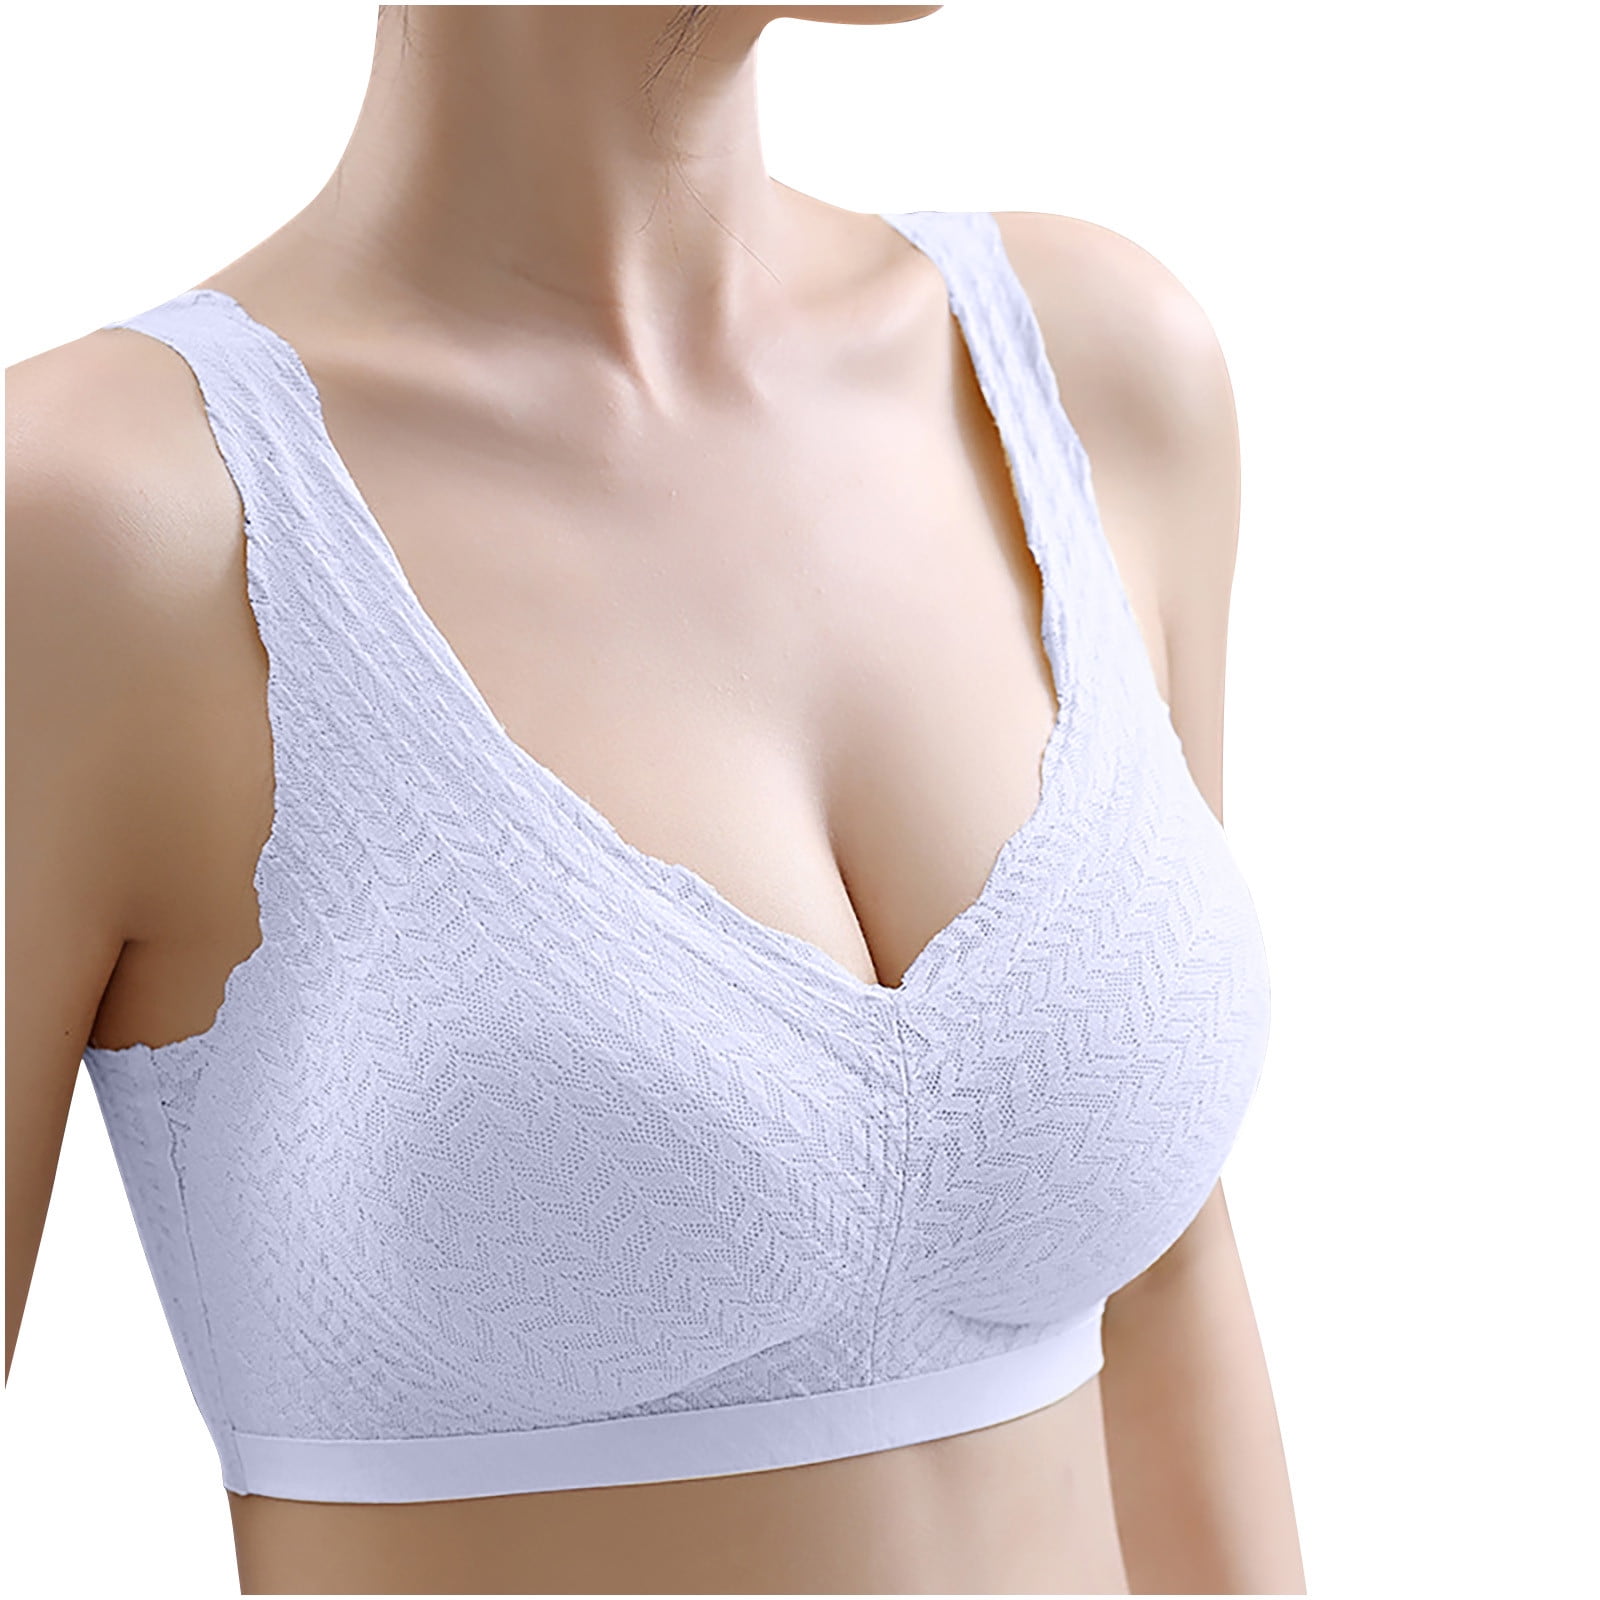 Bigersell Plus Size Sports Bras for Women Sale High Support Sports